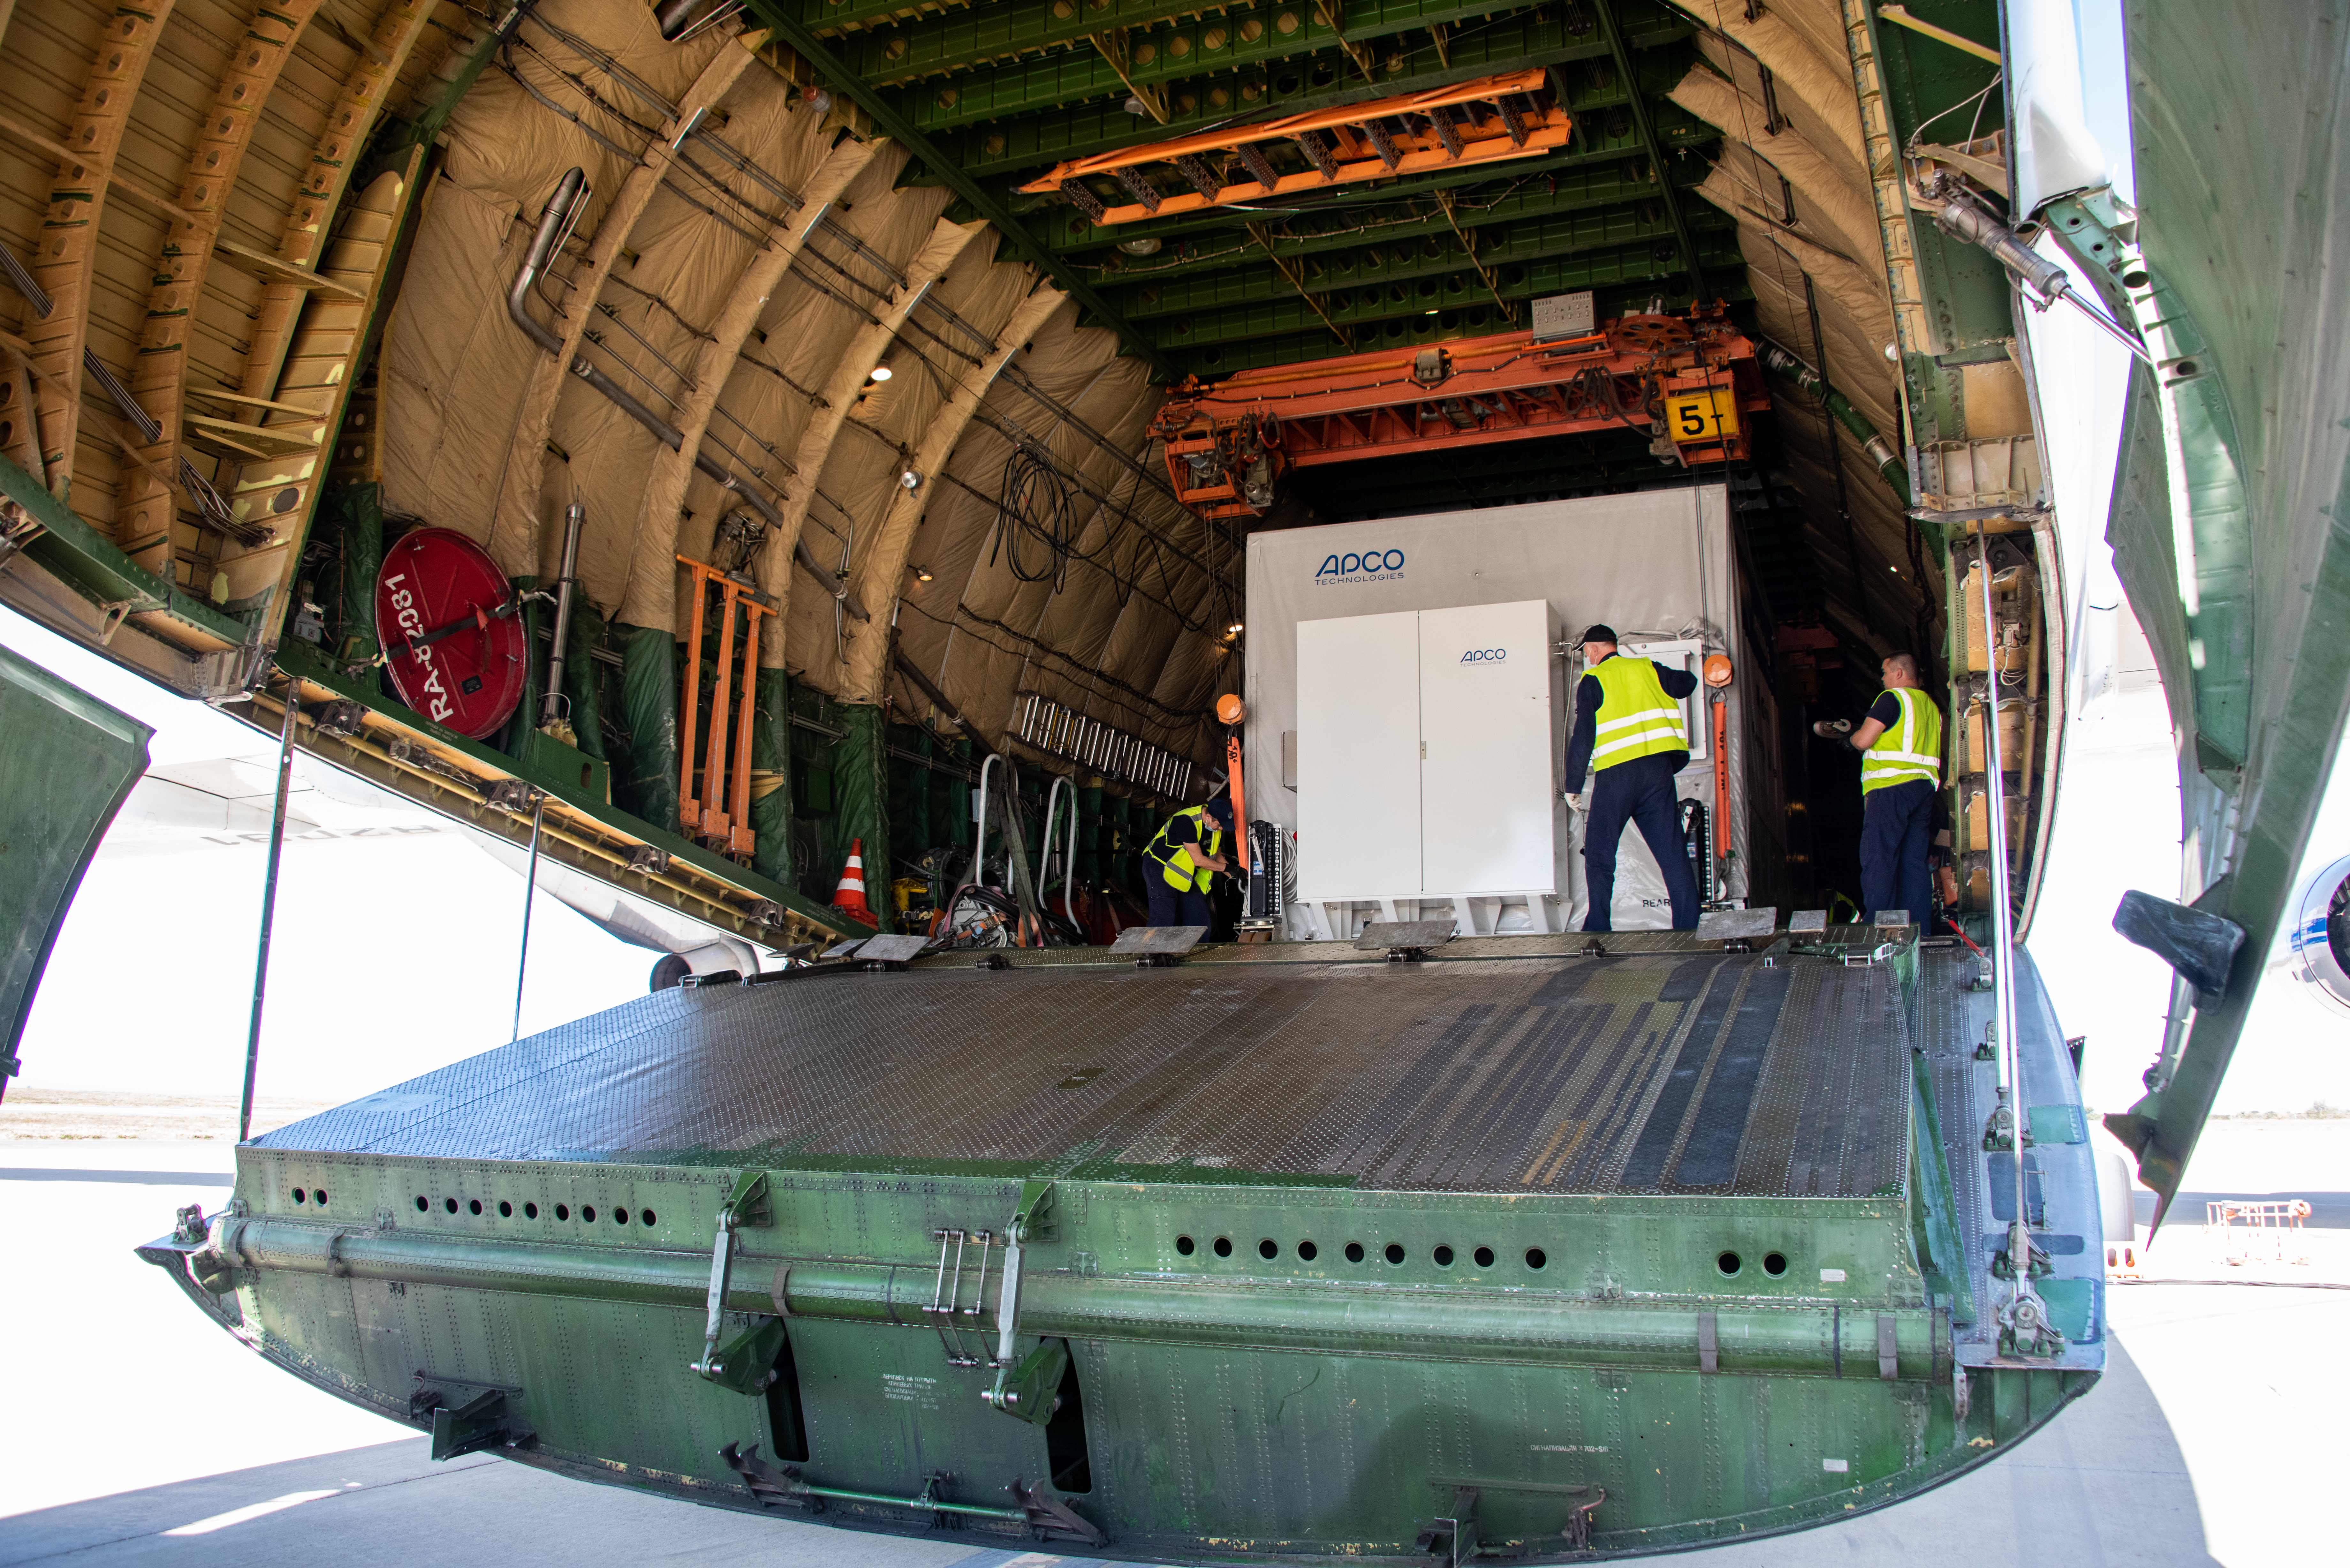 A photo of the plane's cargo bay as crew prepare to unload the spacecraft.